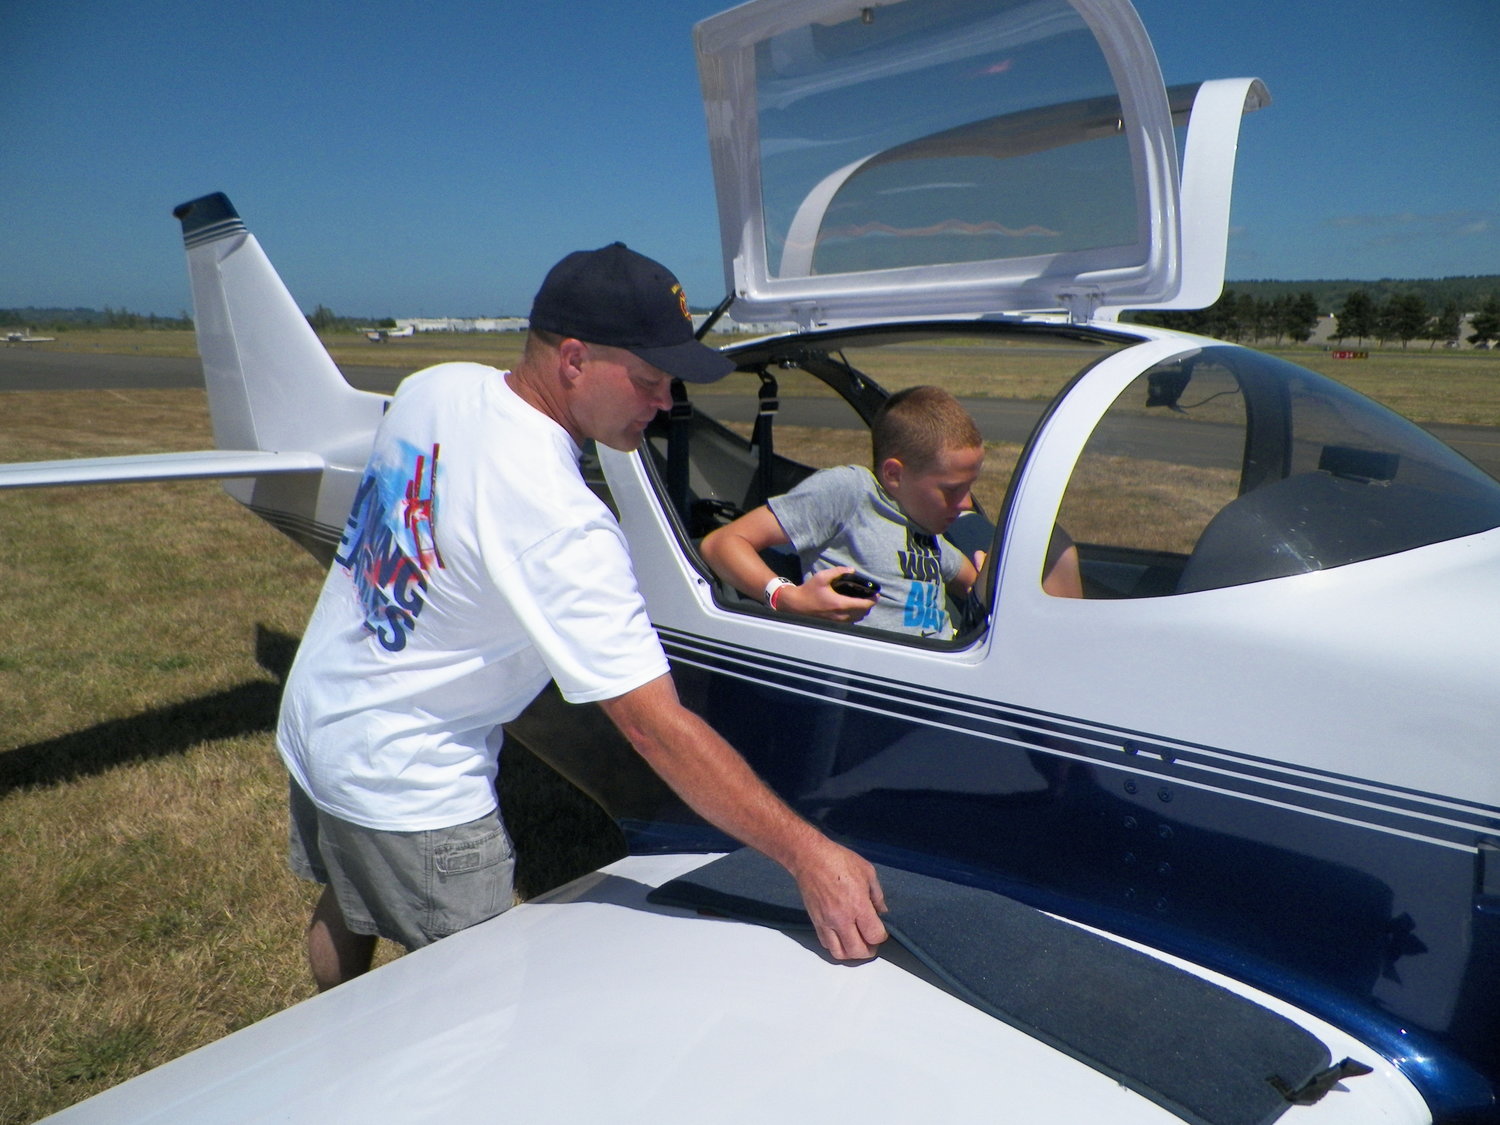 The local chapter of the Experimental Aircraft Association (EAA Chapter 609) awarded $10,000 in Ray Aviation Scholarships to three high school-aged Lewis County residents to help them earn their pilot’s licenses.